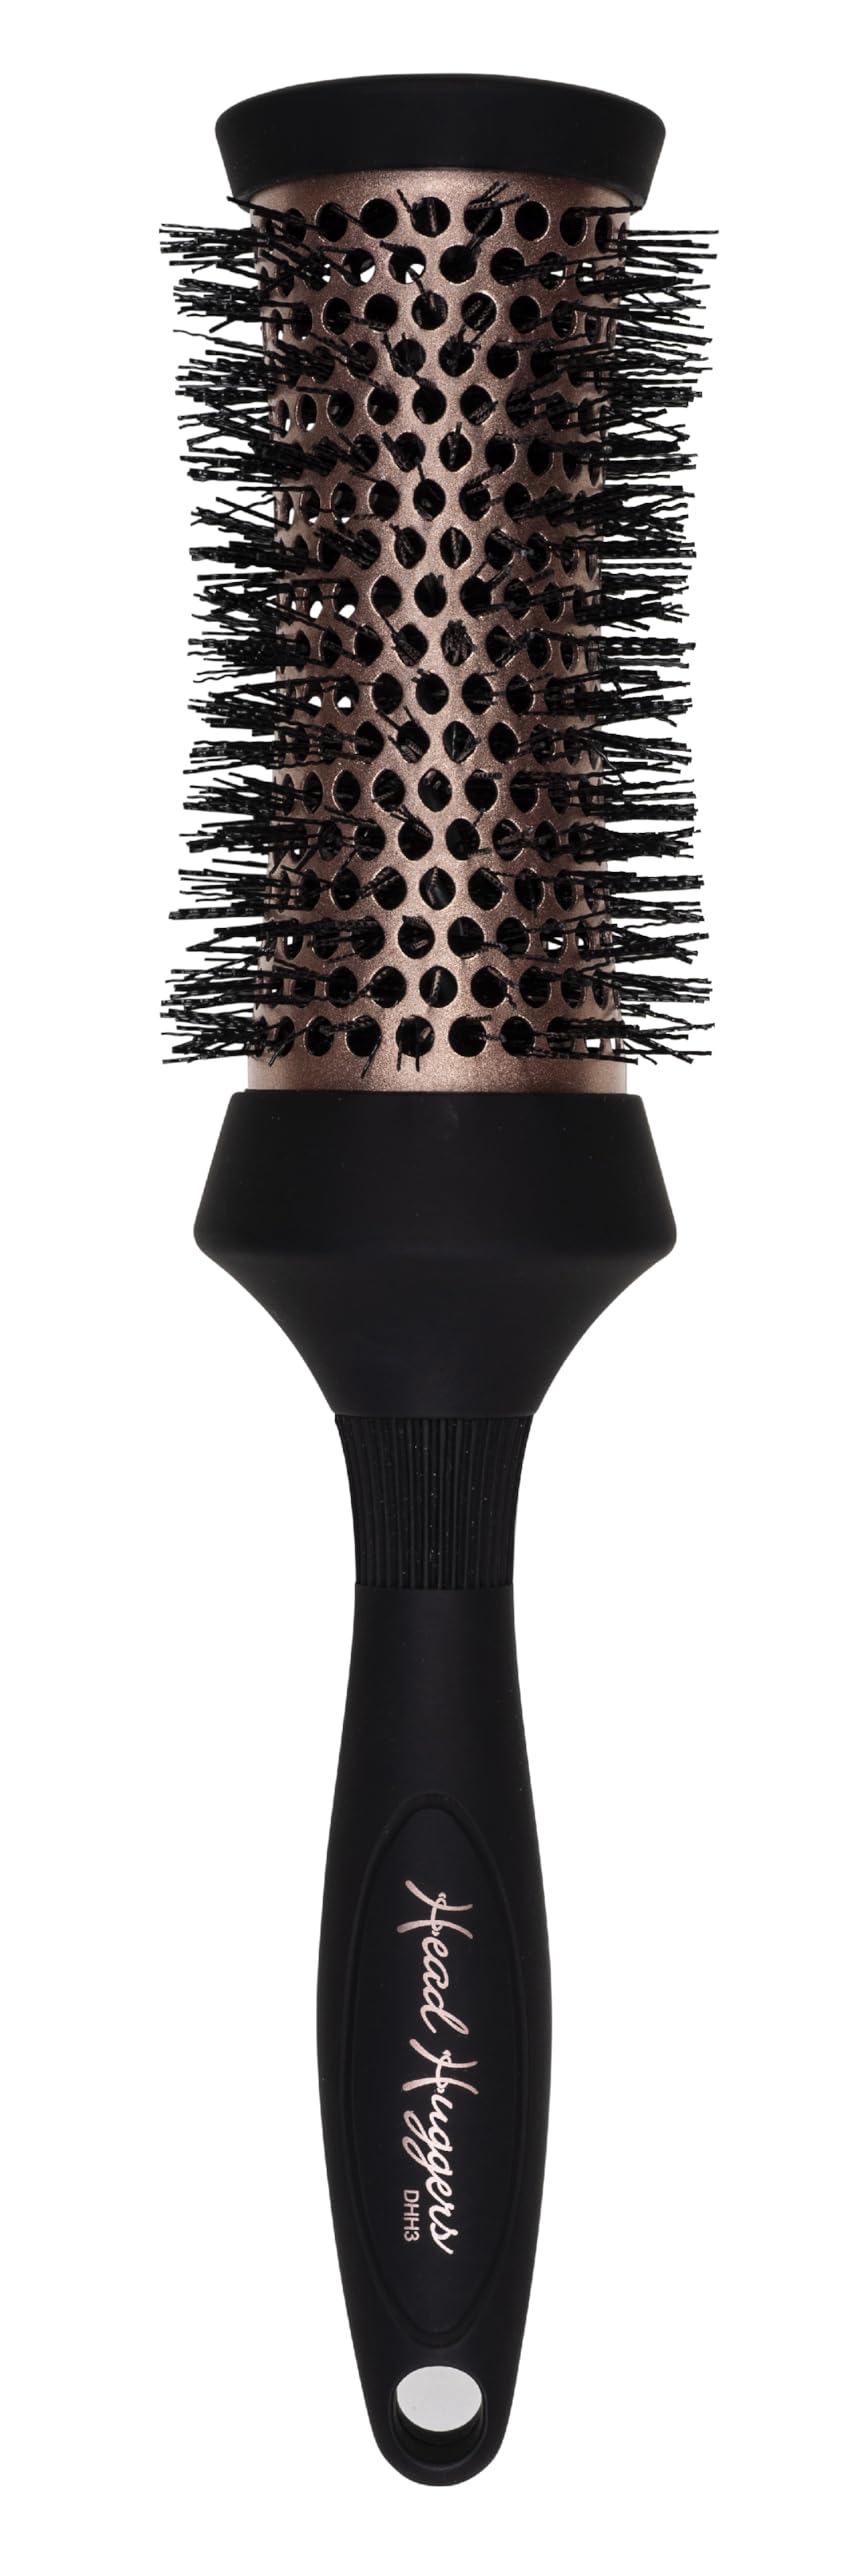 Denman Medium Thermo Ceramic Hourglass Hot Curl Brush, Hair Curling Brush for Blow-Drying, Straightening, Defined Curls, Volume & Root-Lift - Rose Gold & Black